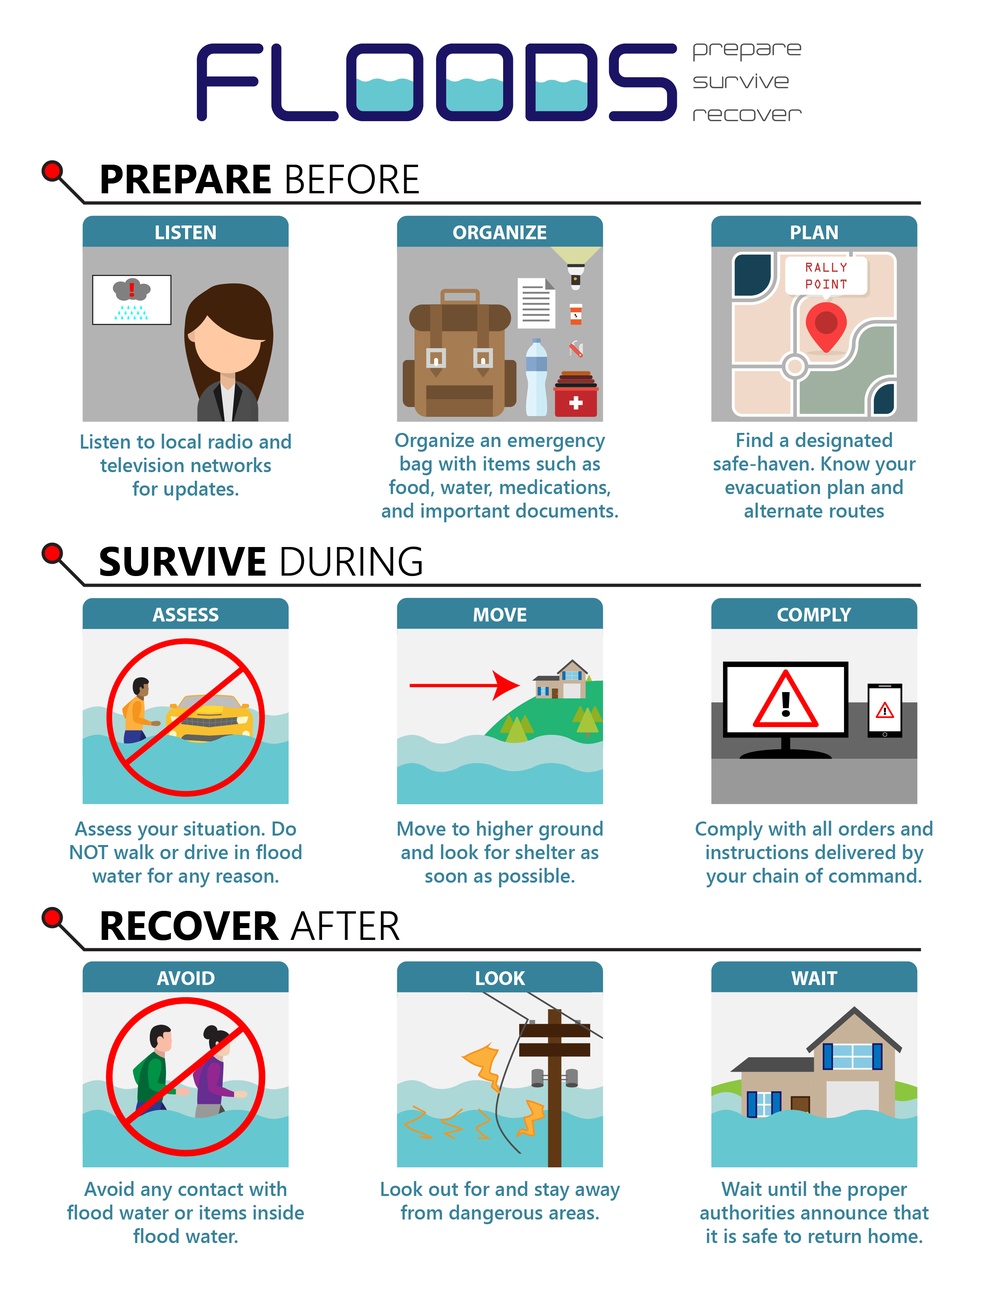 Graphic Easily Conveys Important Steps to Take During a Flood